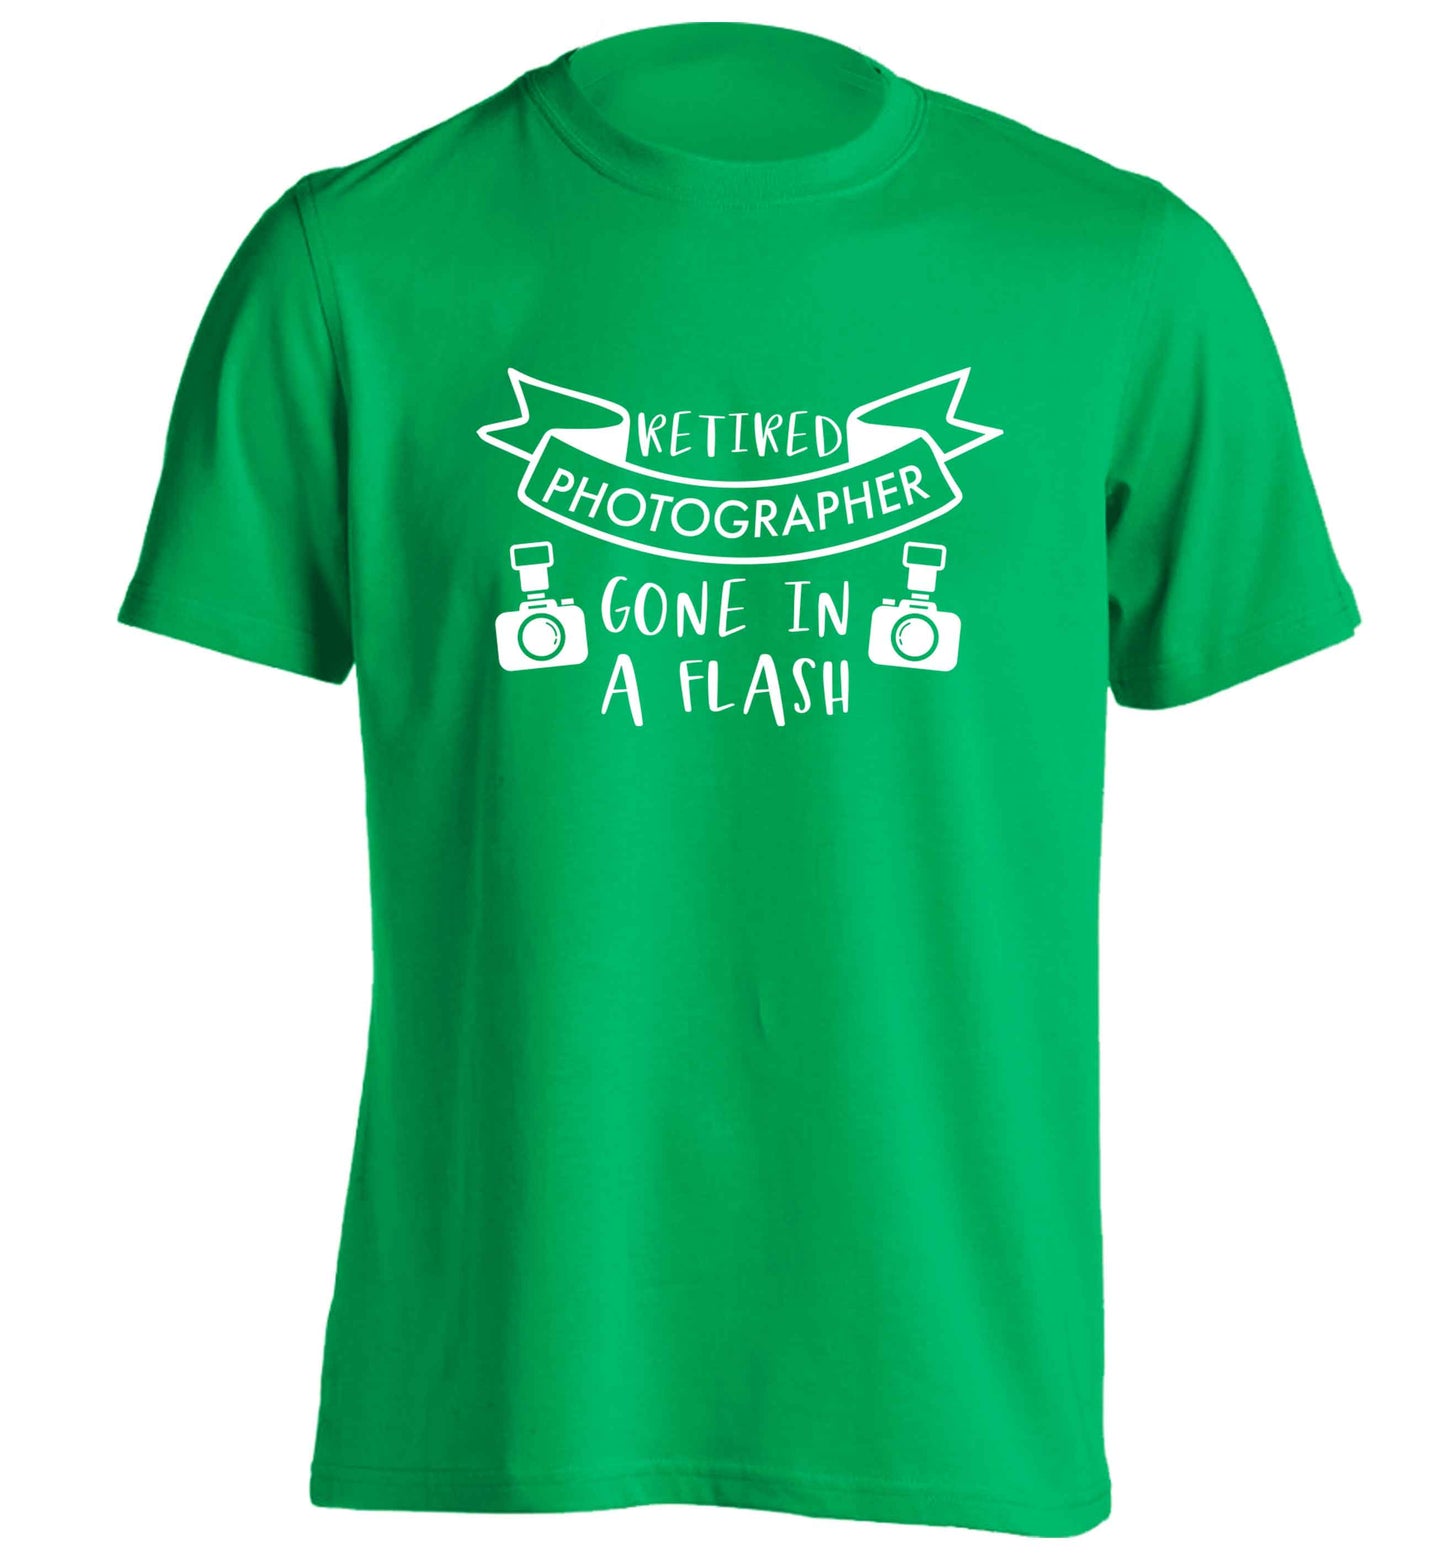 Retired photographer gone in a flash adults unisex green Tshirt 2XL